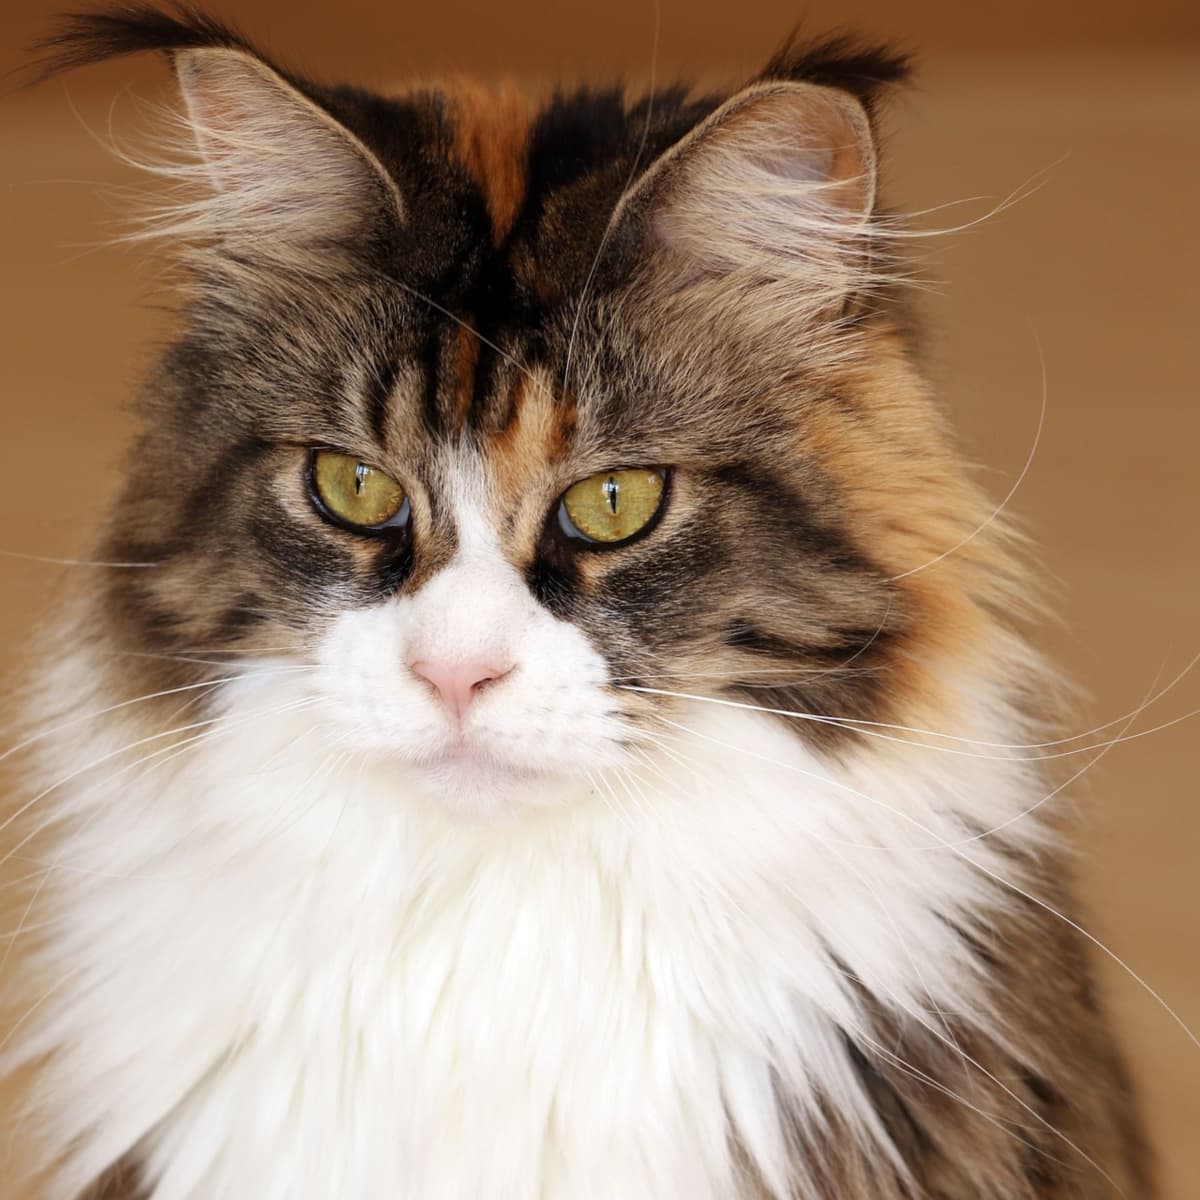 Most Dedicated Cat Breeds: Here are 10 of the most loyal breeds of